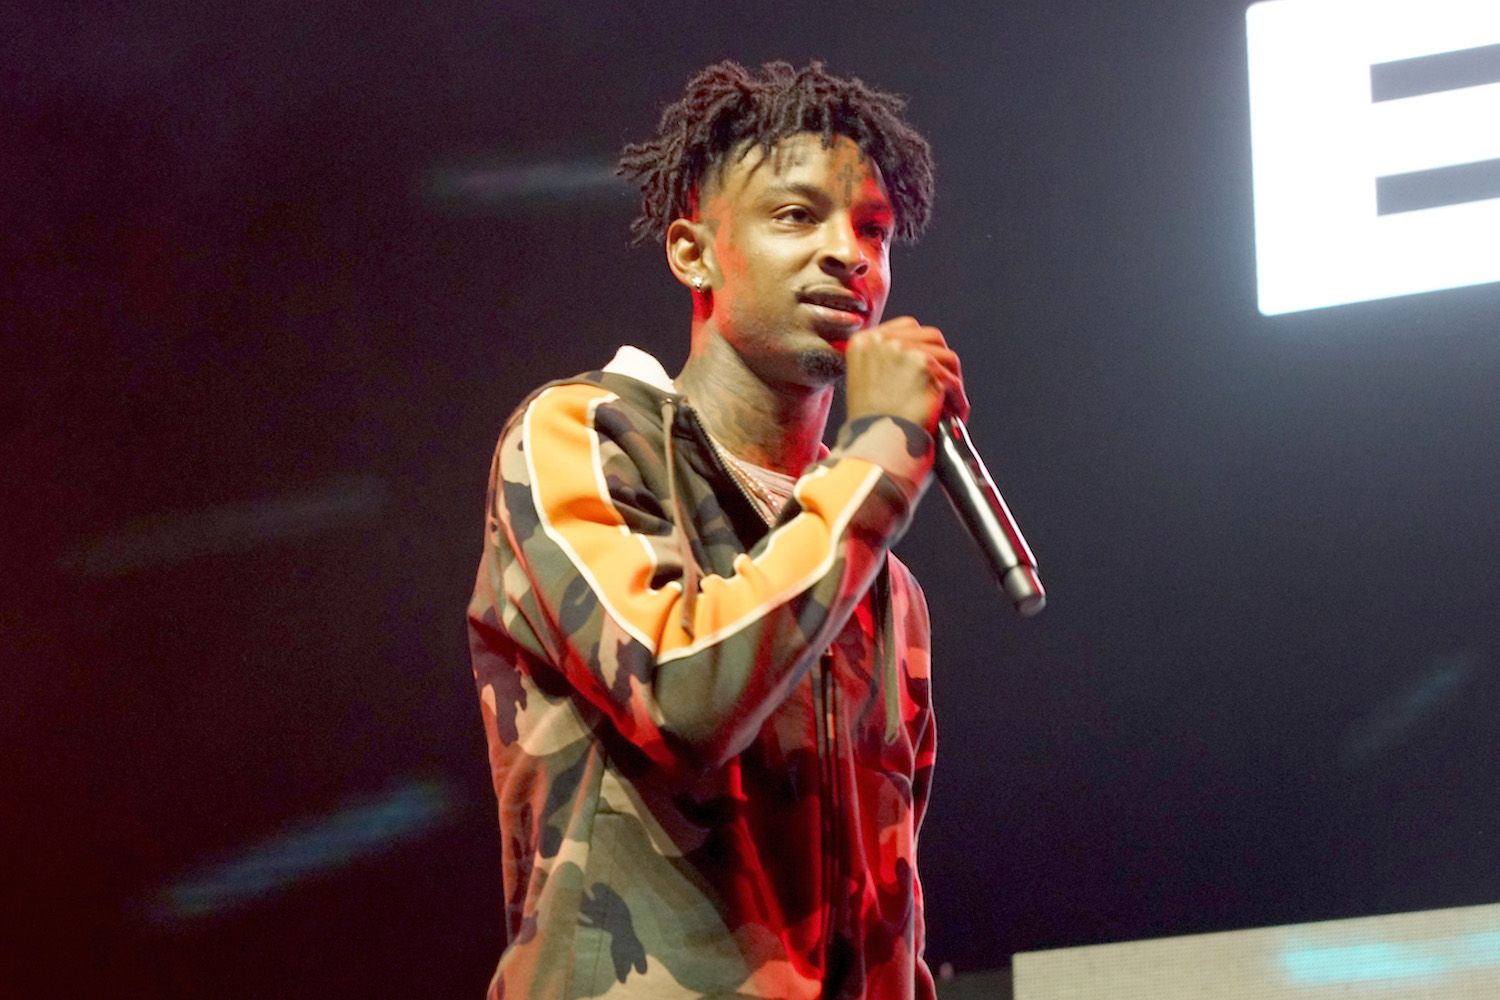 21 Savage teases the release date (or time) for his new music